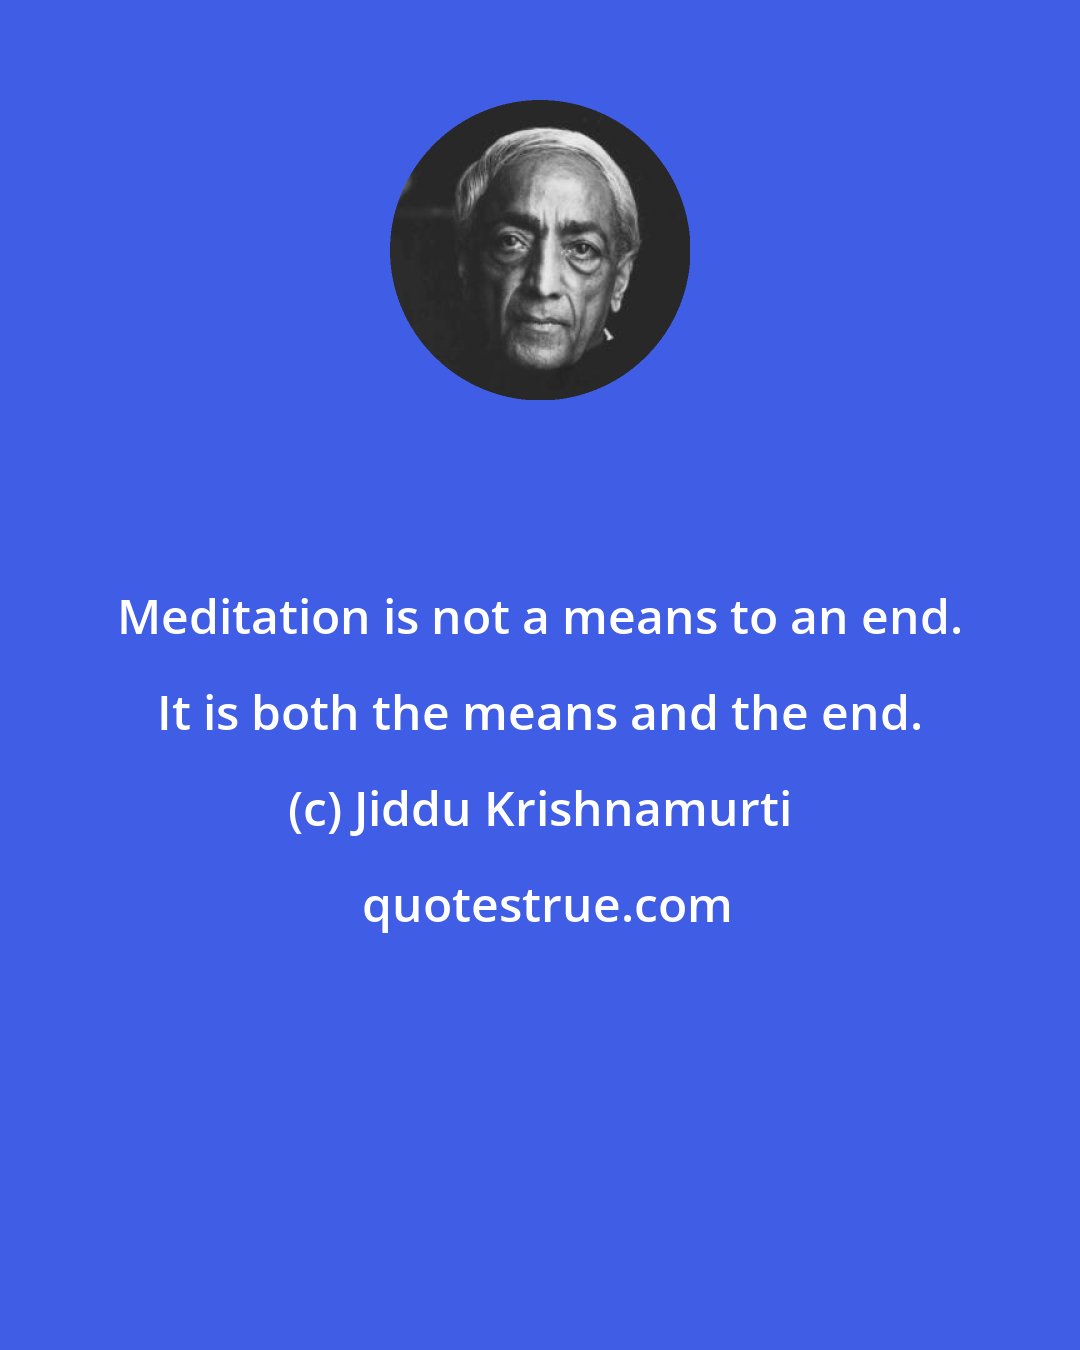 Jiddu Krishnamurti: Meditation is not a means to an end. It is both the means and the end.